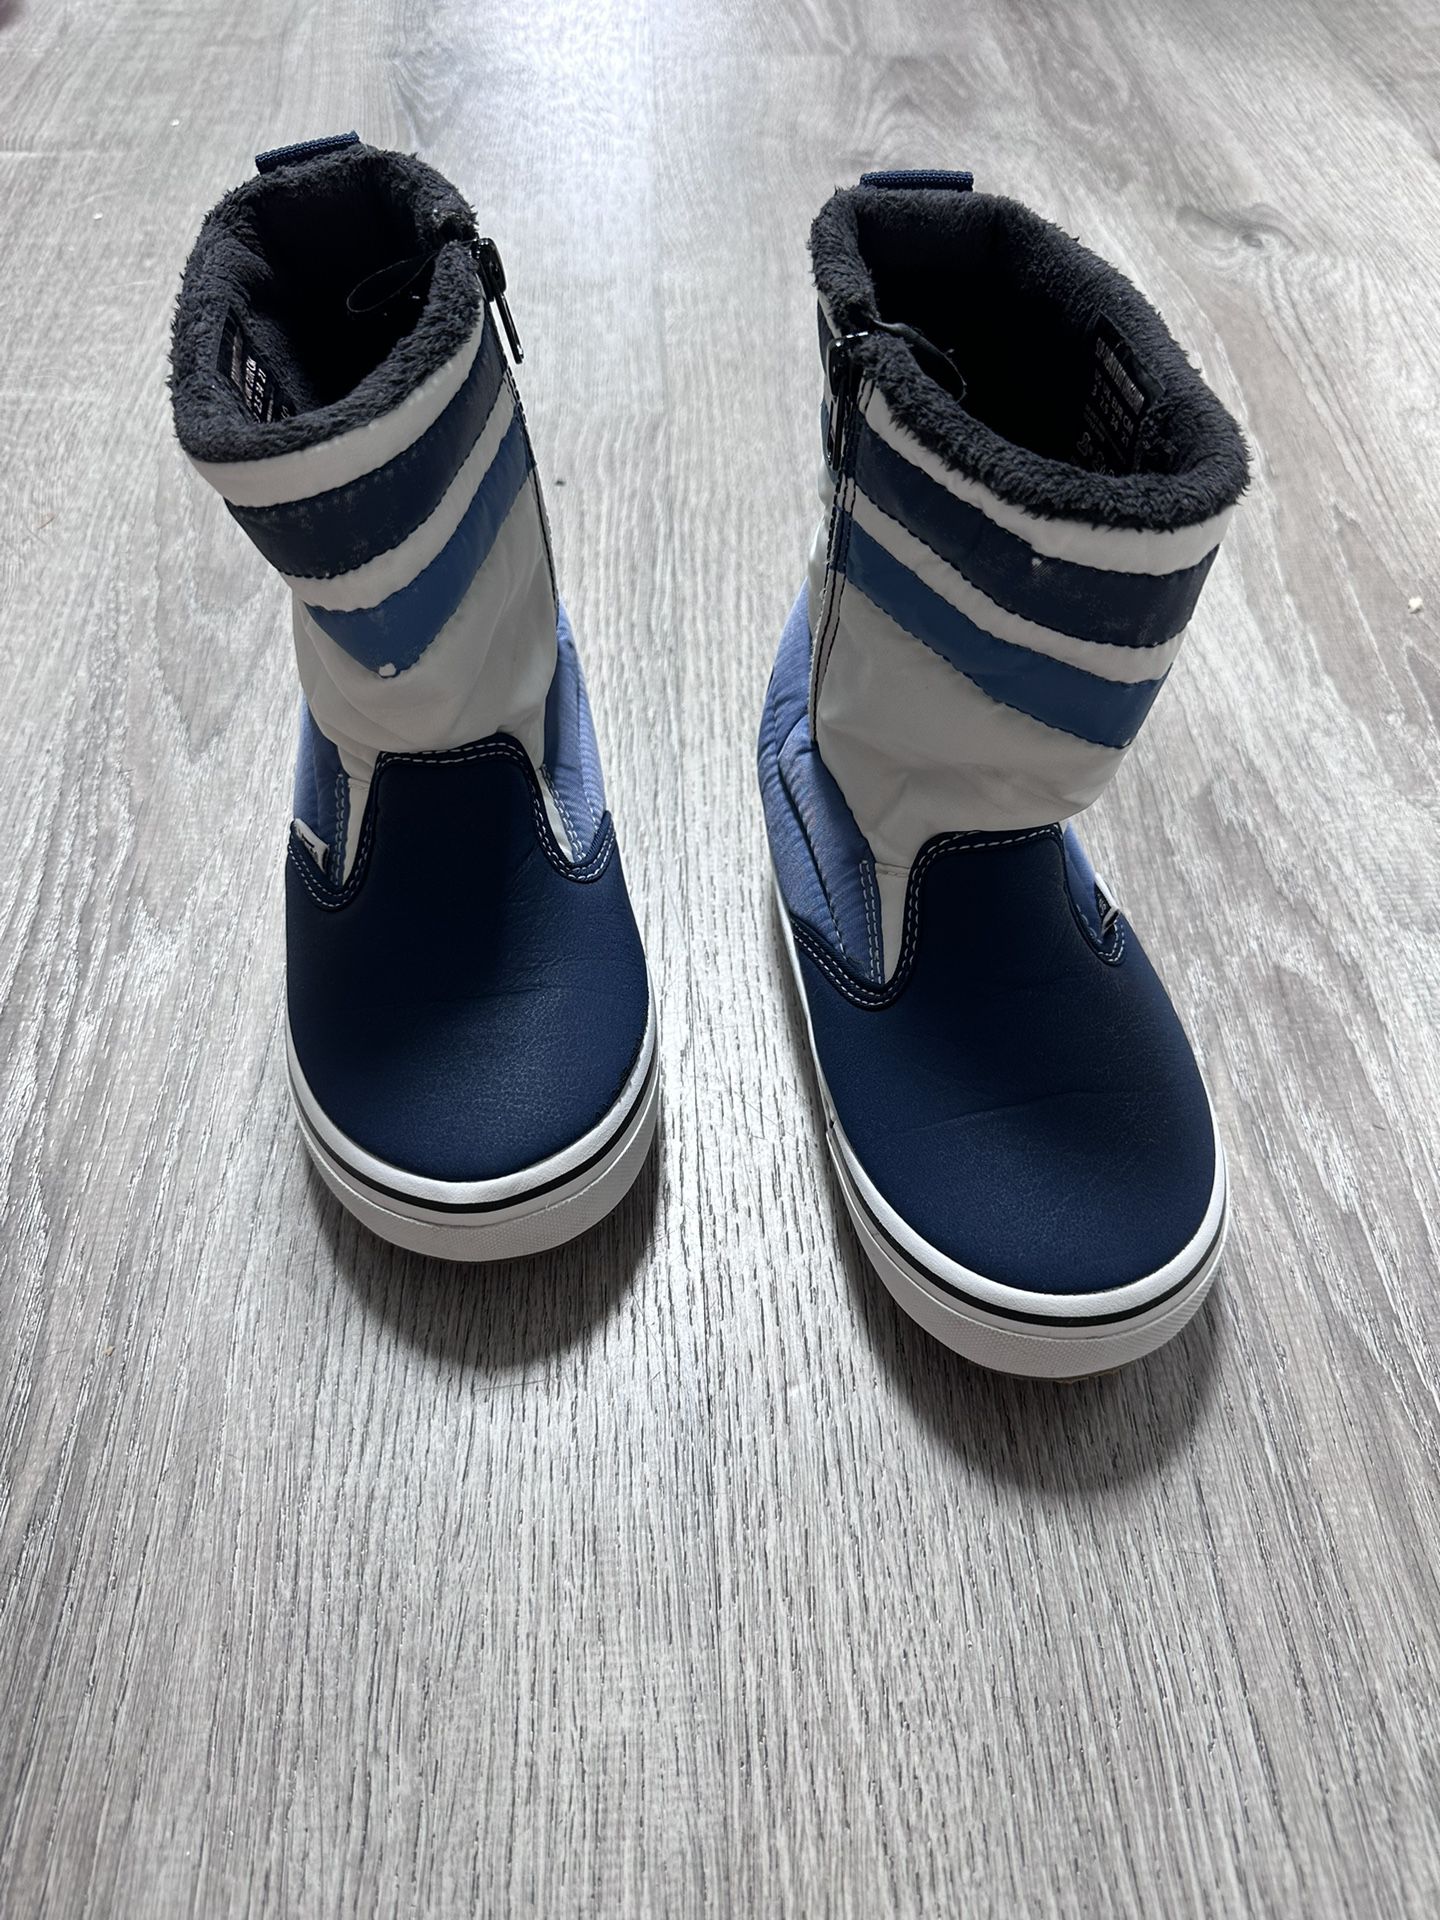 Vans Snow Boots , Preloved , Size 3, Original Price:$179 Our Price :$80